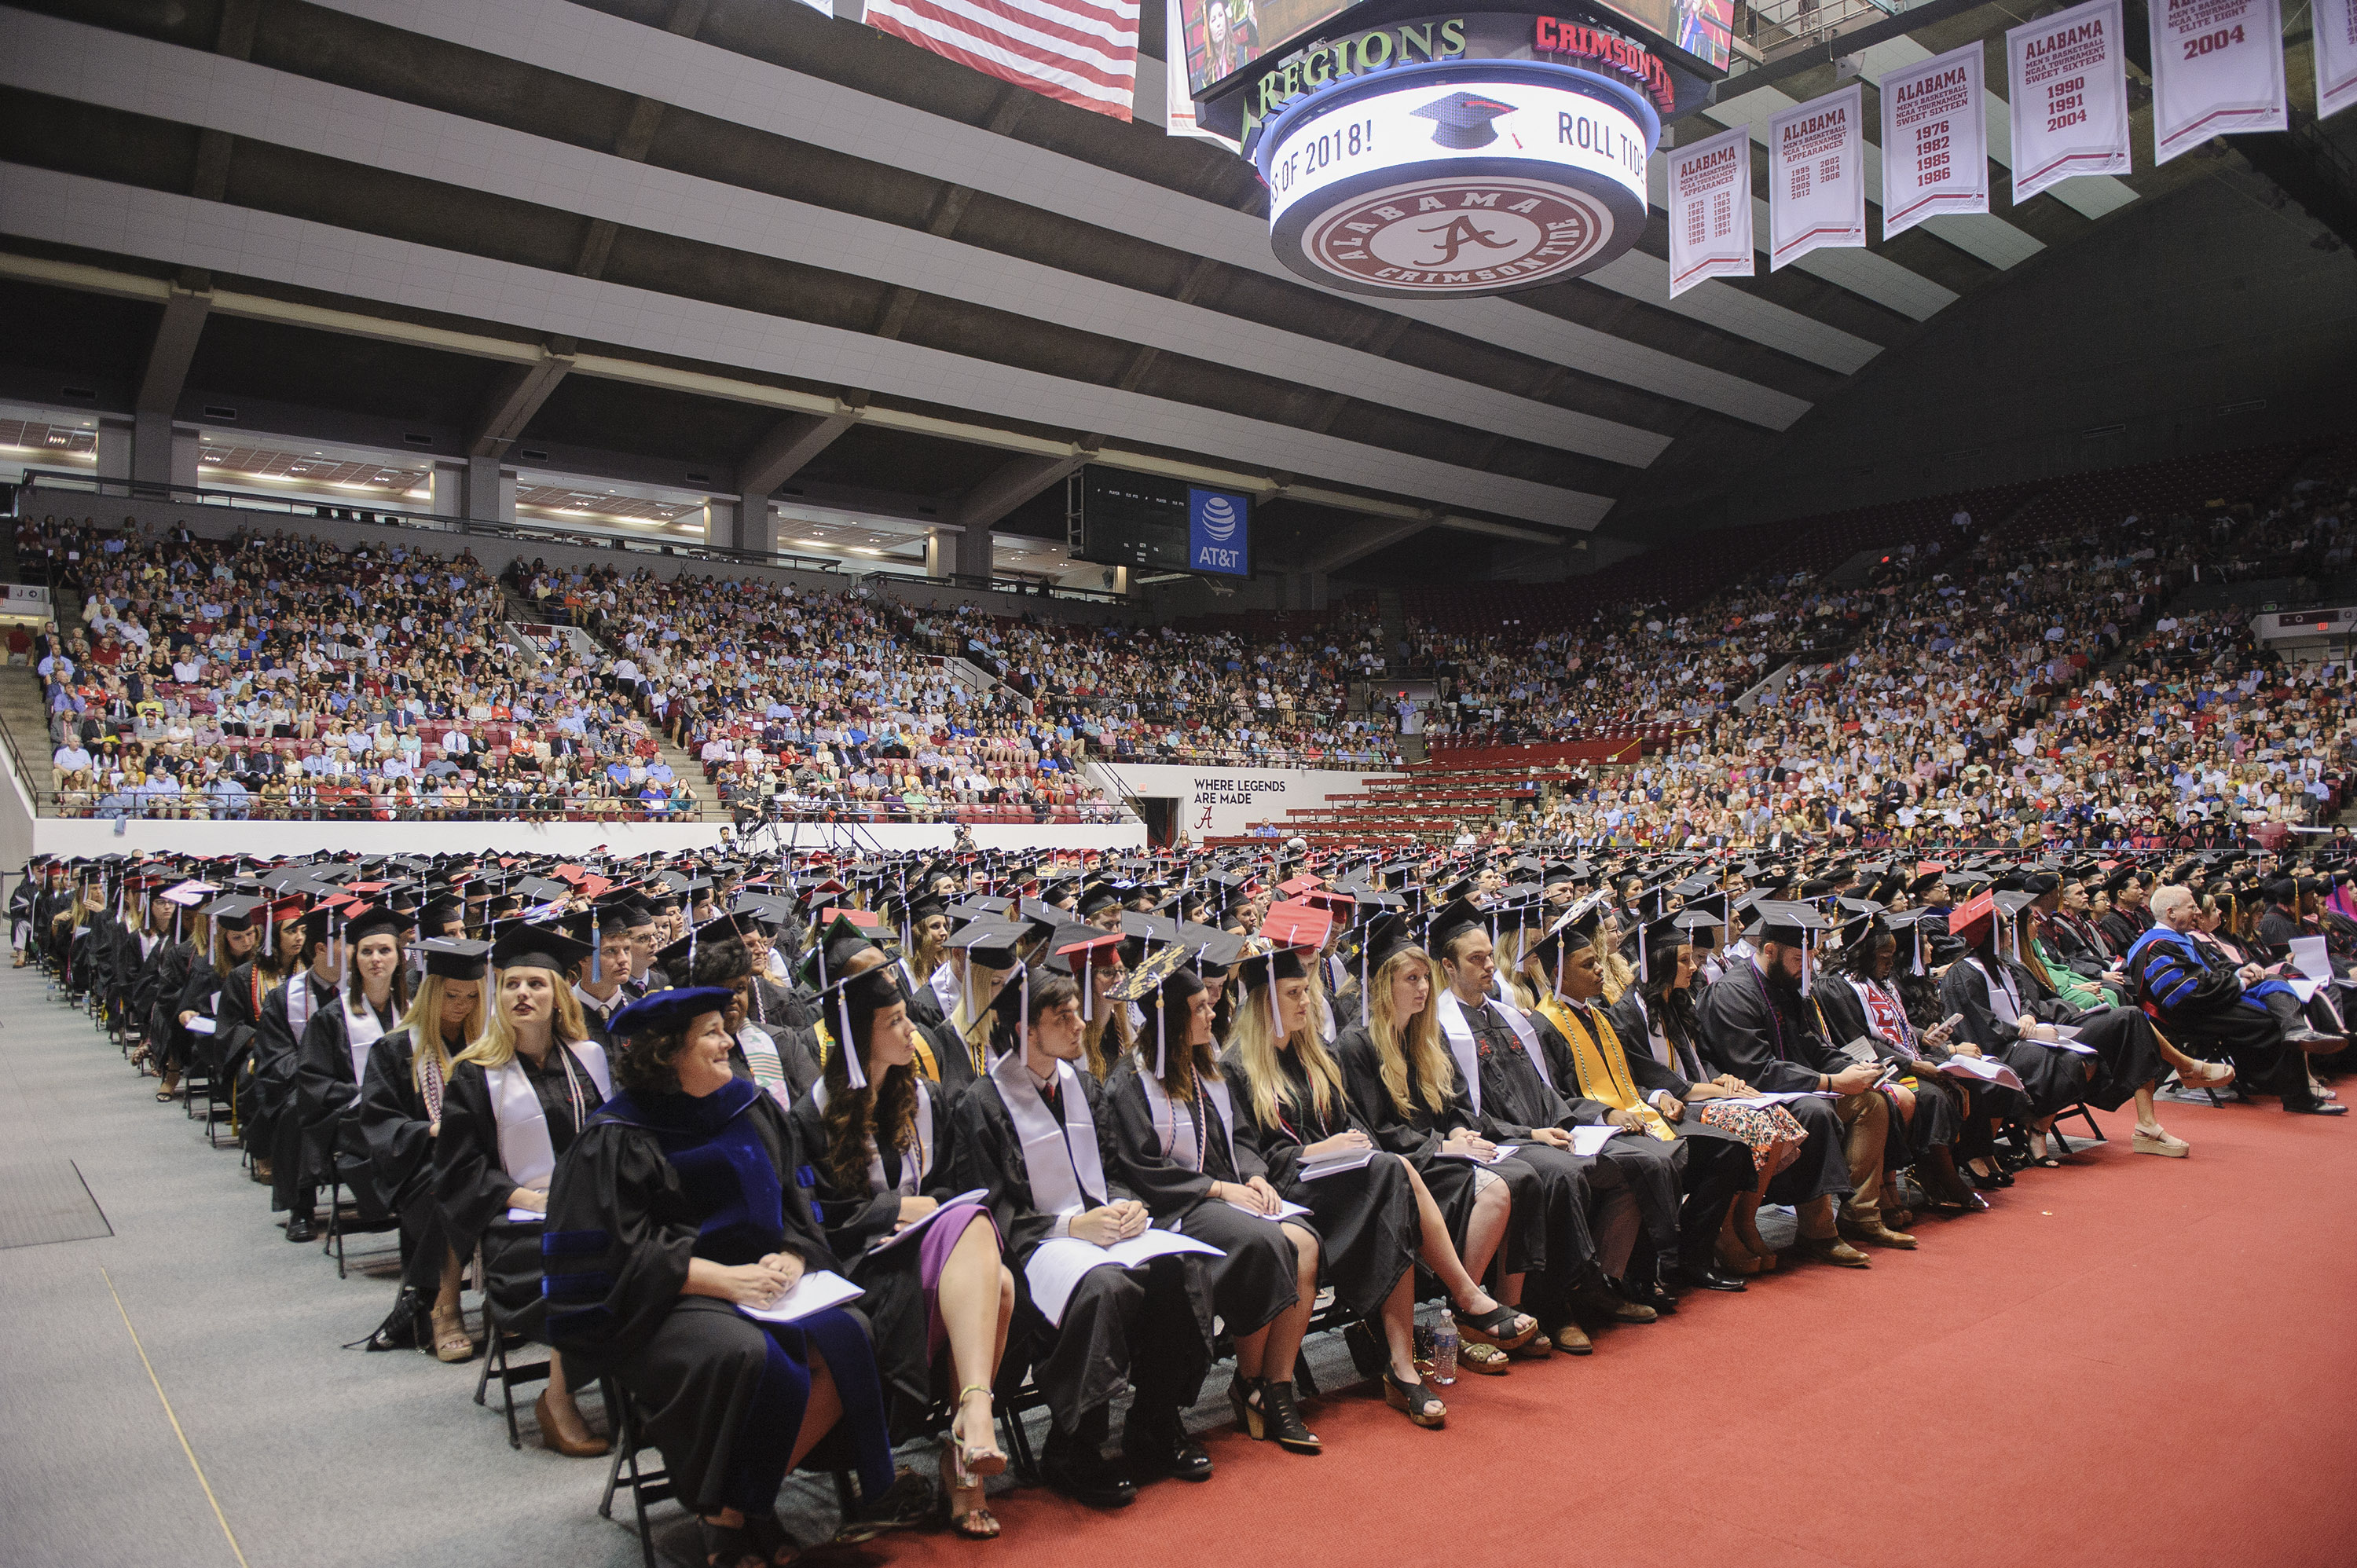 UA to Hold 2018 Fall Commencement Exercises Dec. 15